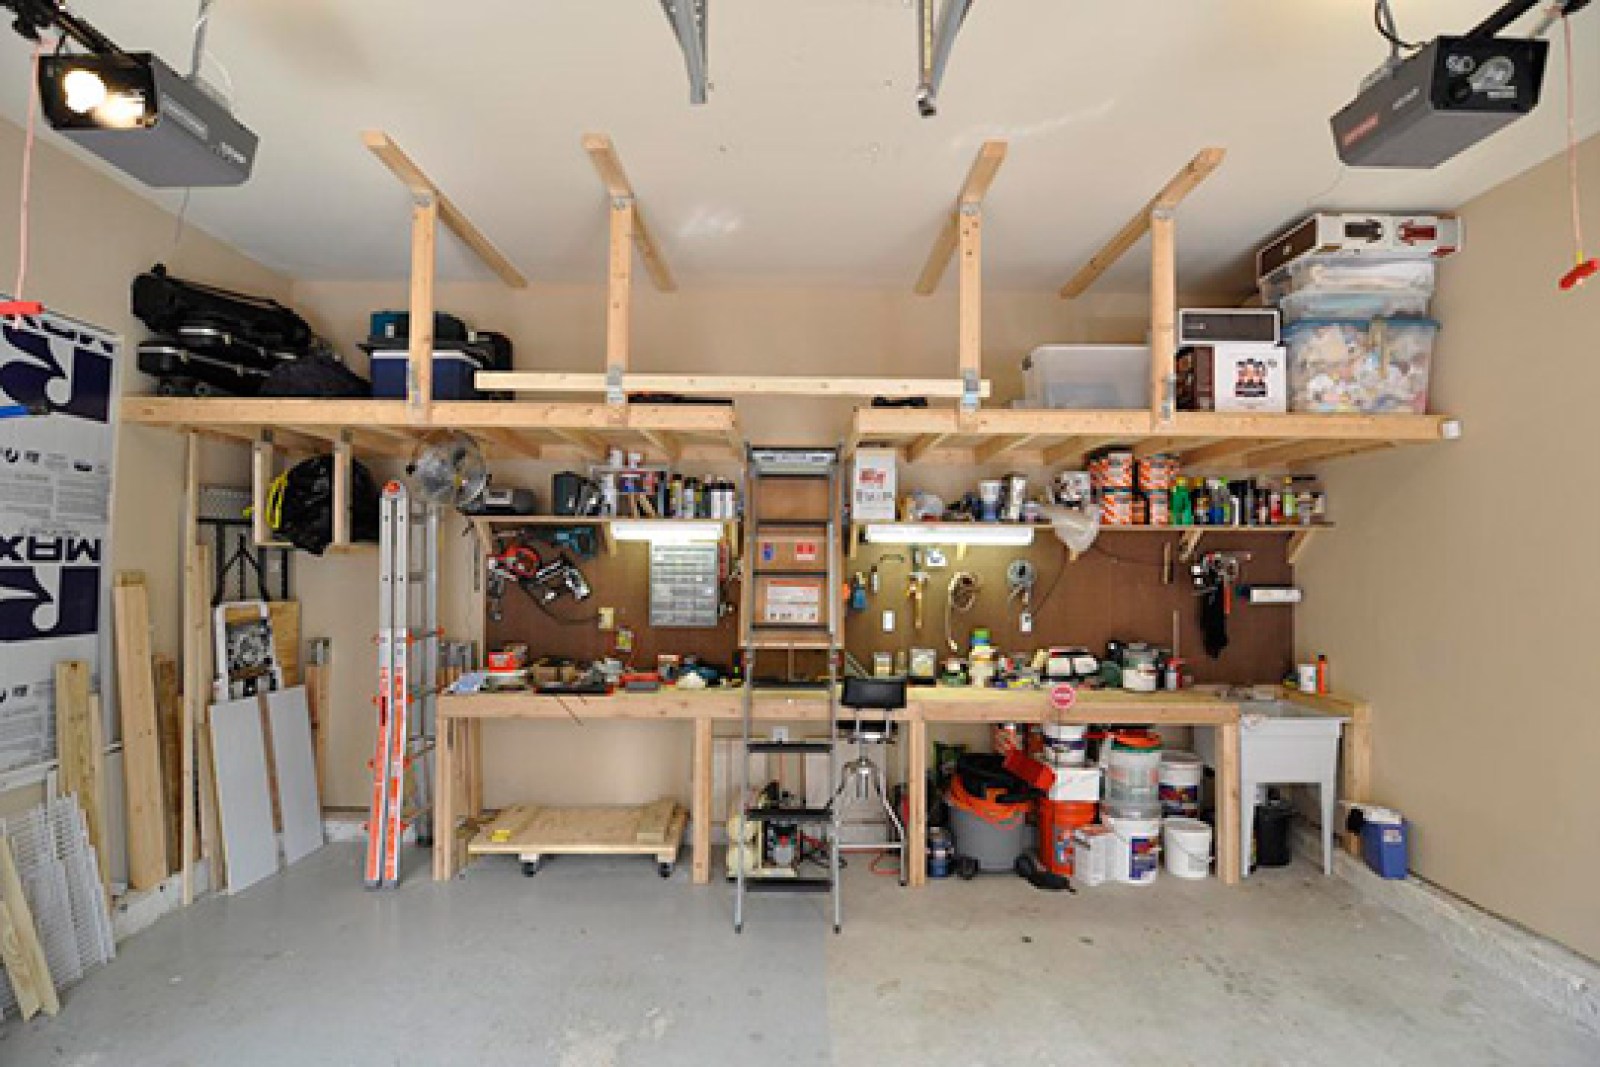 49 Brilliant Garage Organization Tips, Ideas, and DIY Projects